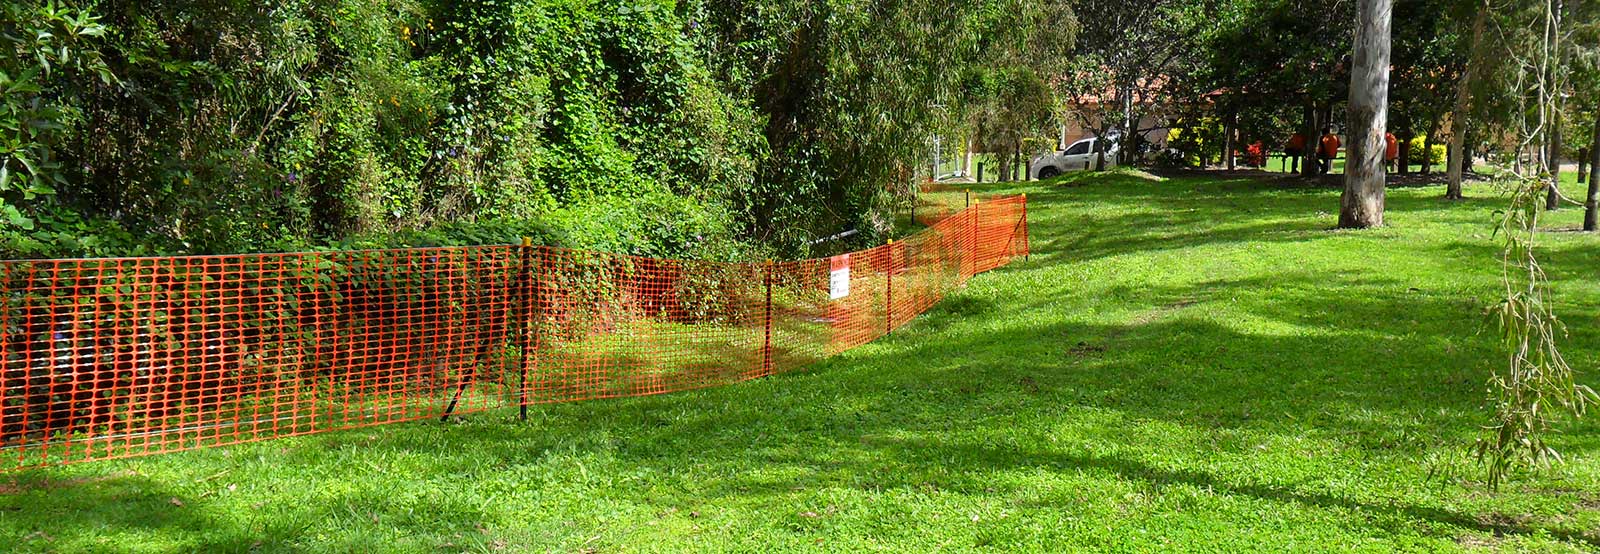 Advanced-Group-Tree-Protection-6-tree-protection-zone-fencing-tree-protection-zone-fencing